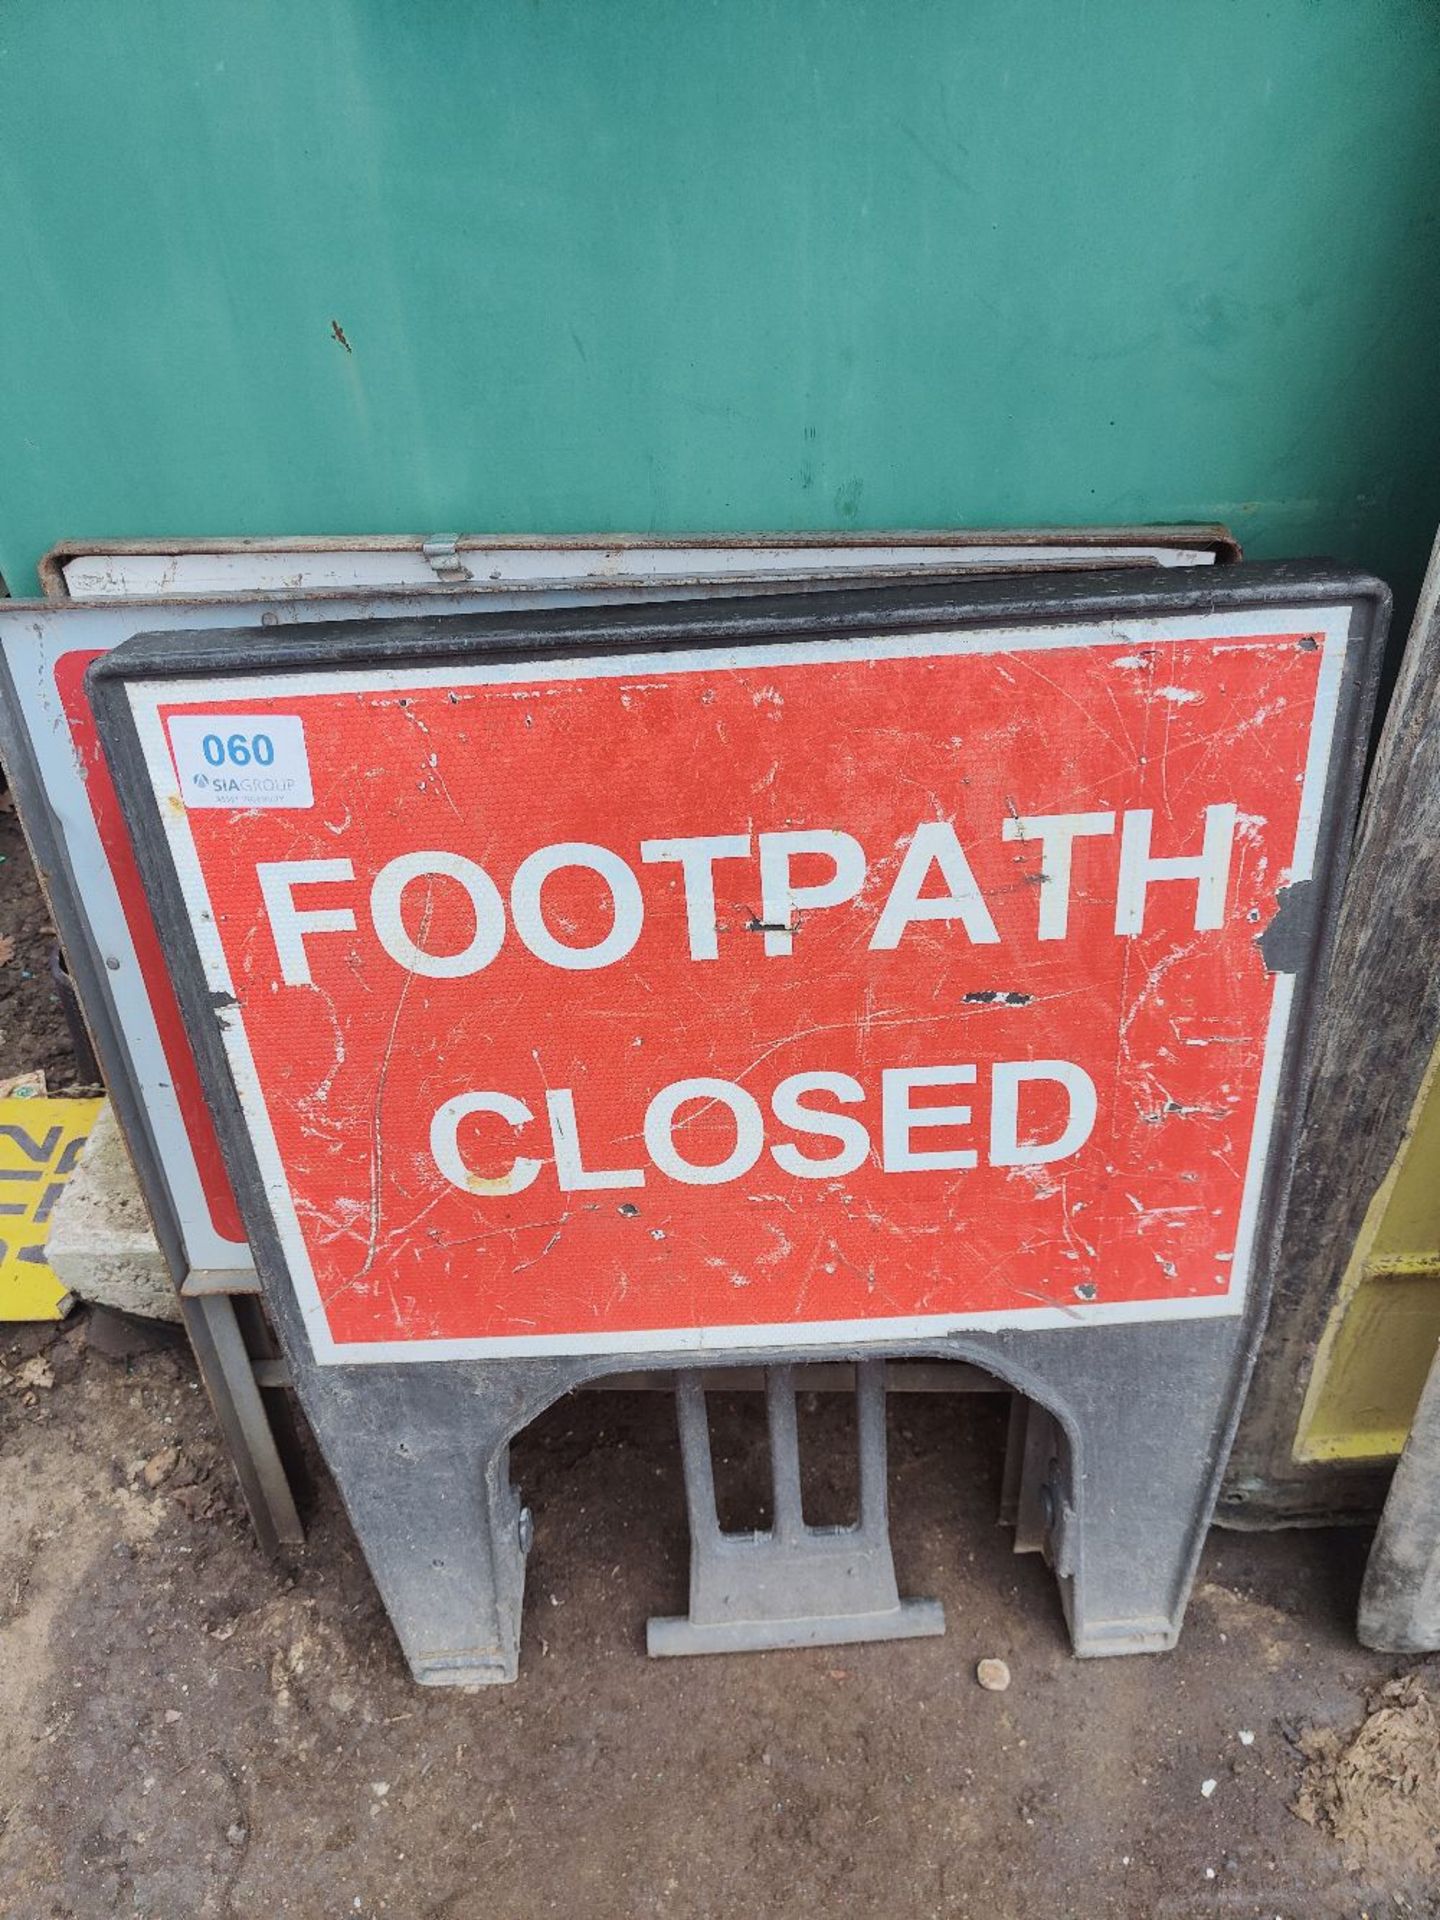 (3) Footpath closed signs